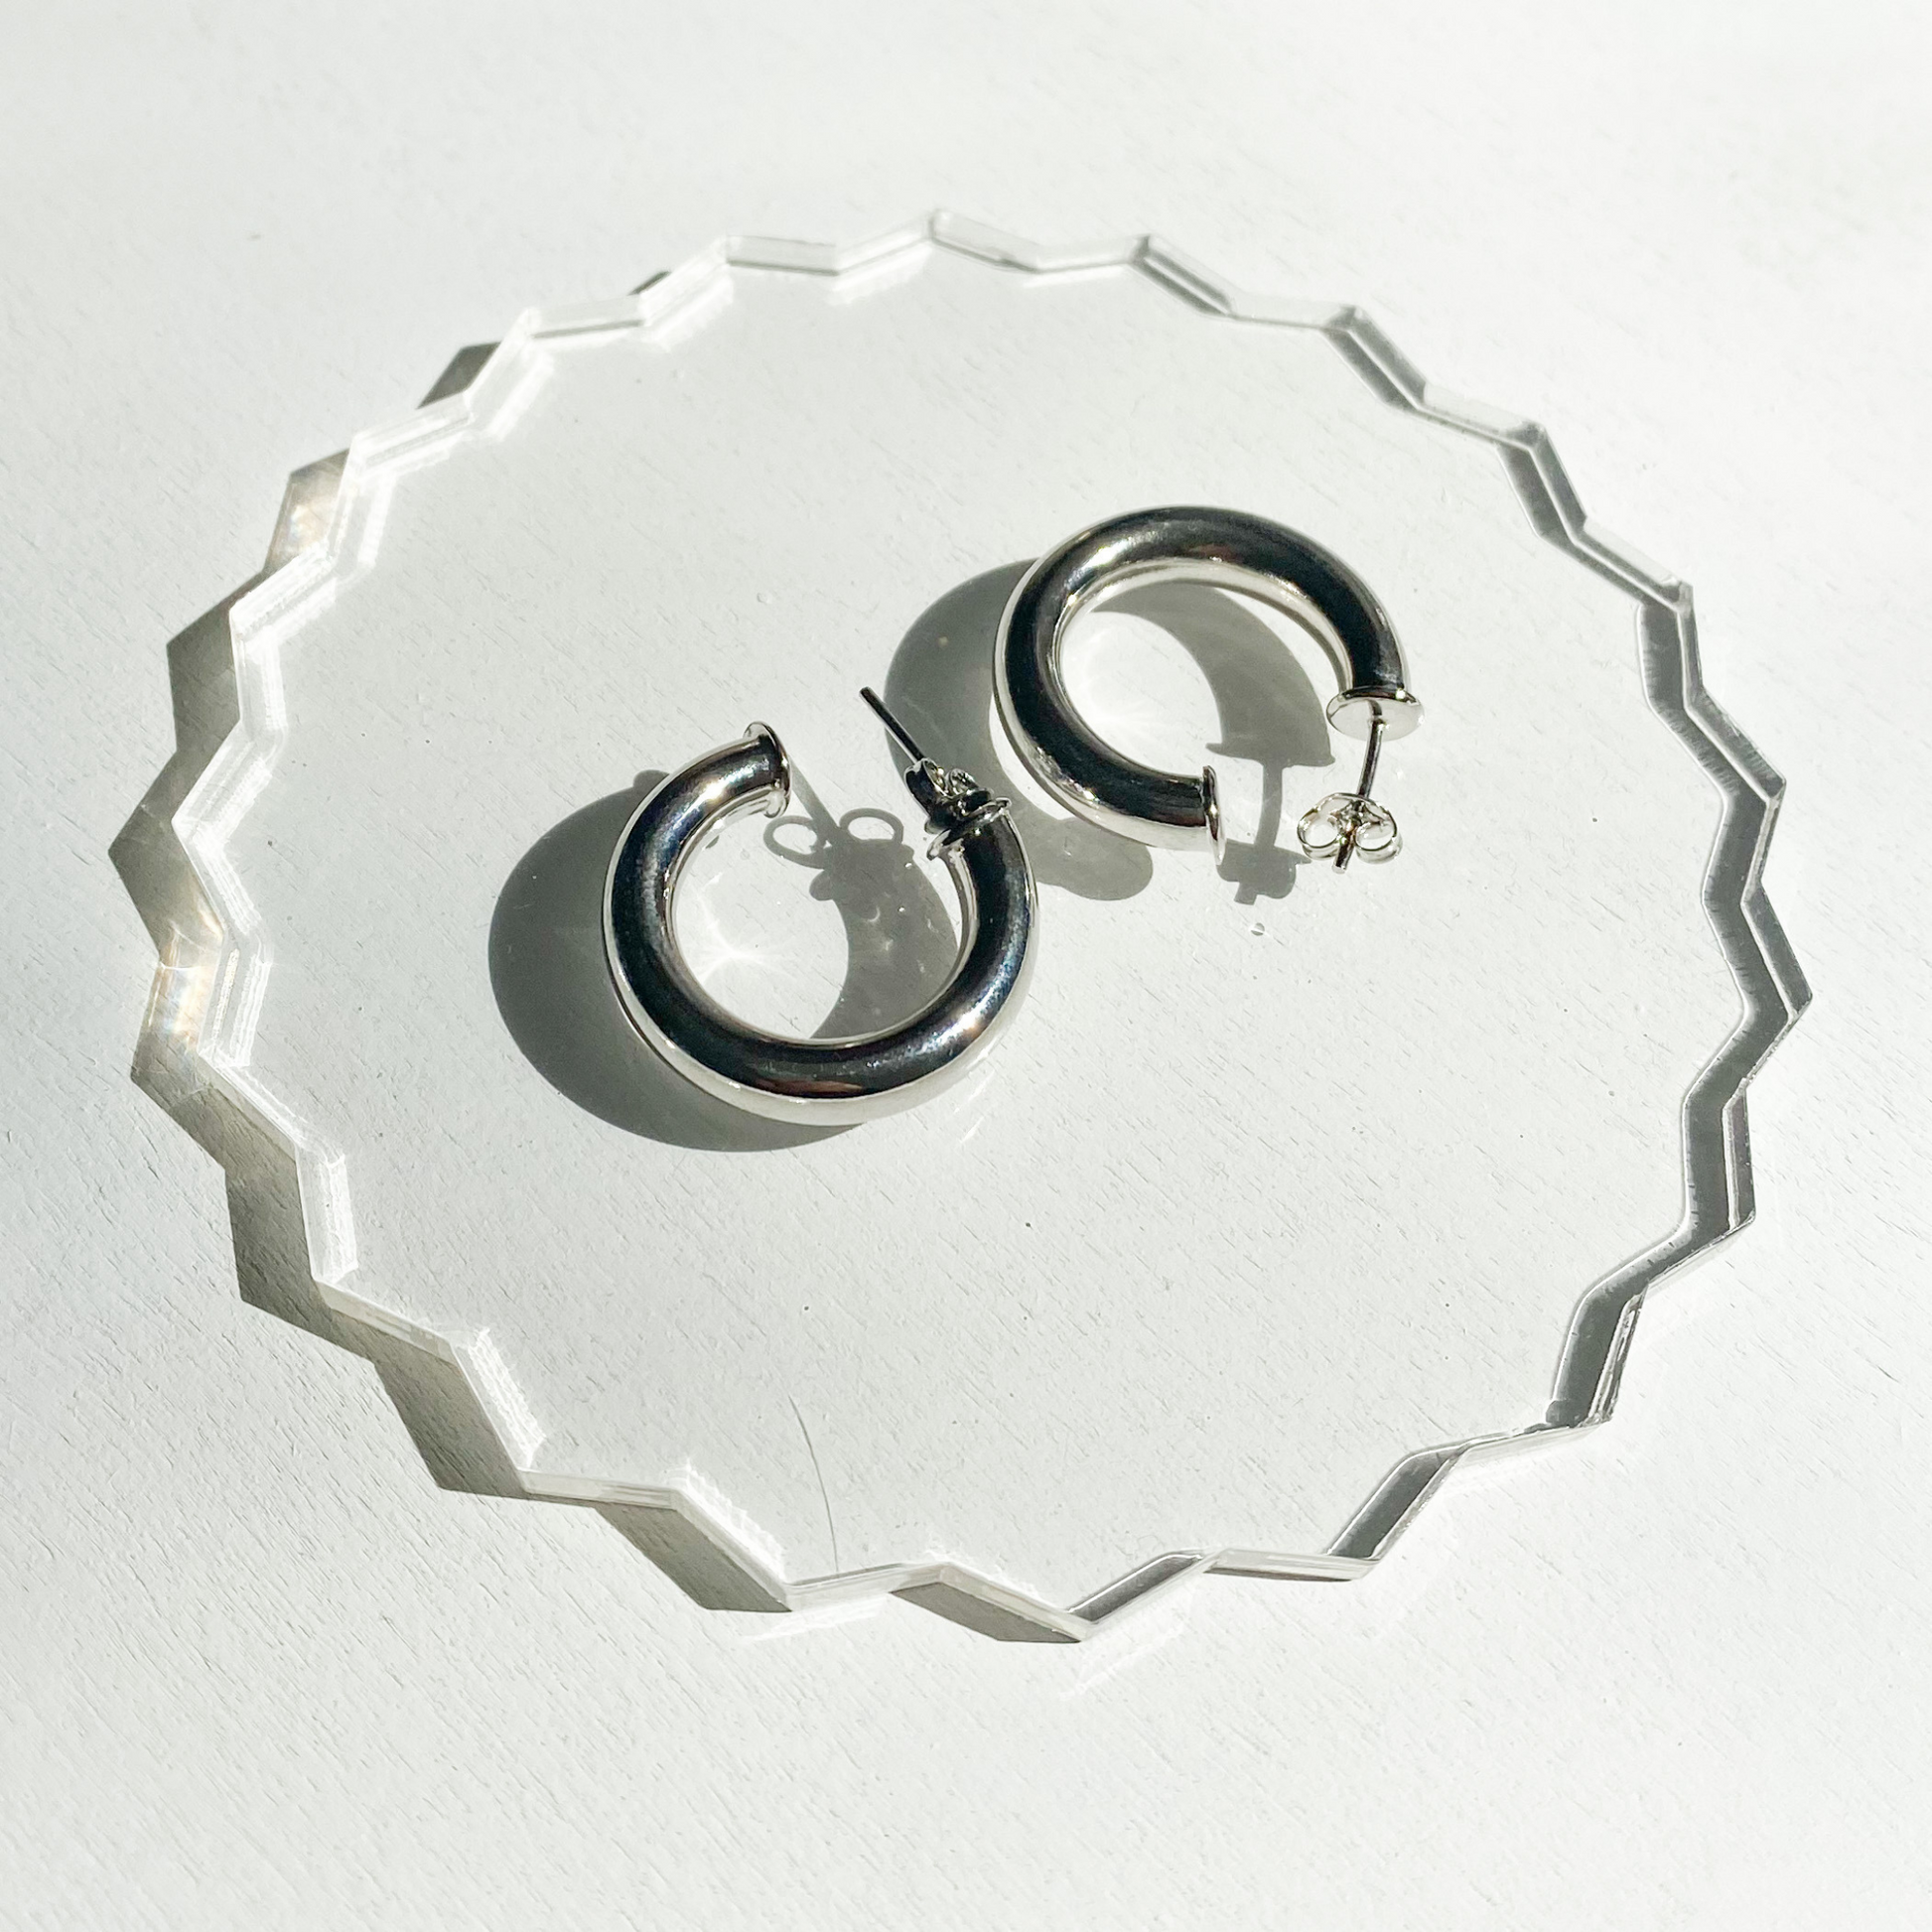 Roop jewelry chunky silver hoops. Silver jewelry in Oakland, Ca. Jewelry boutique in Oakland. Jewelry shop in Oakland.